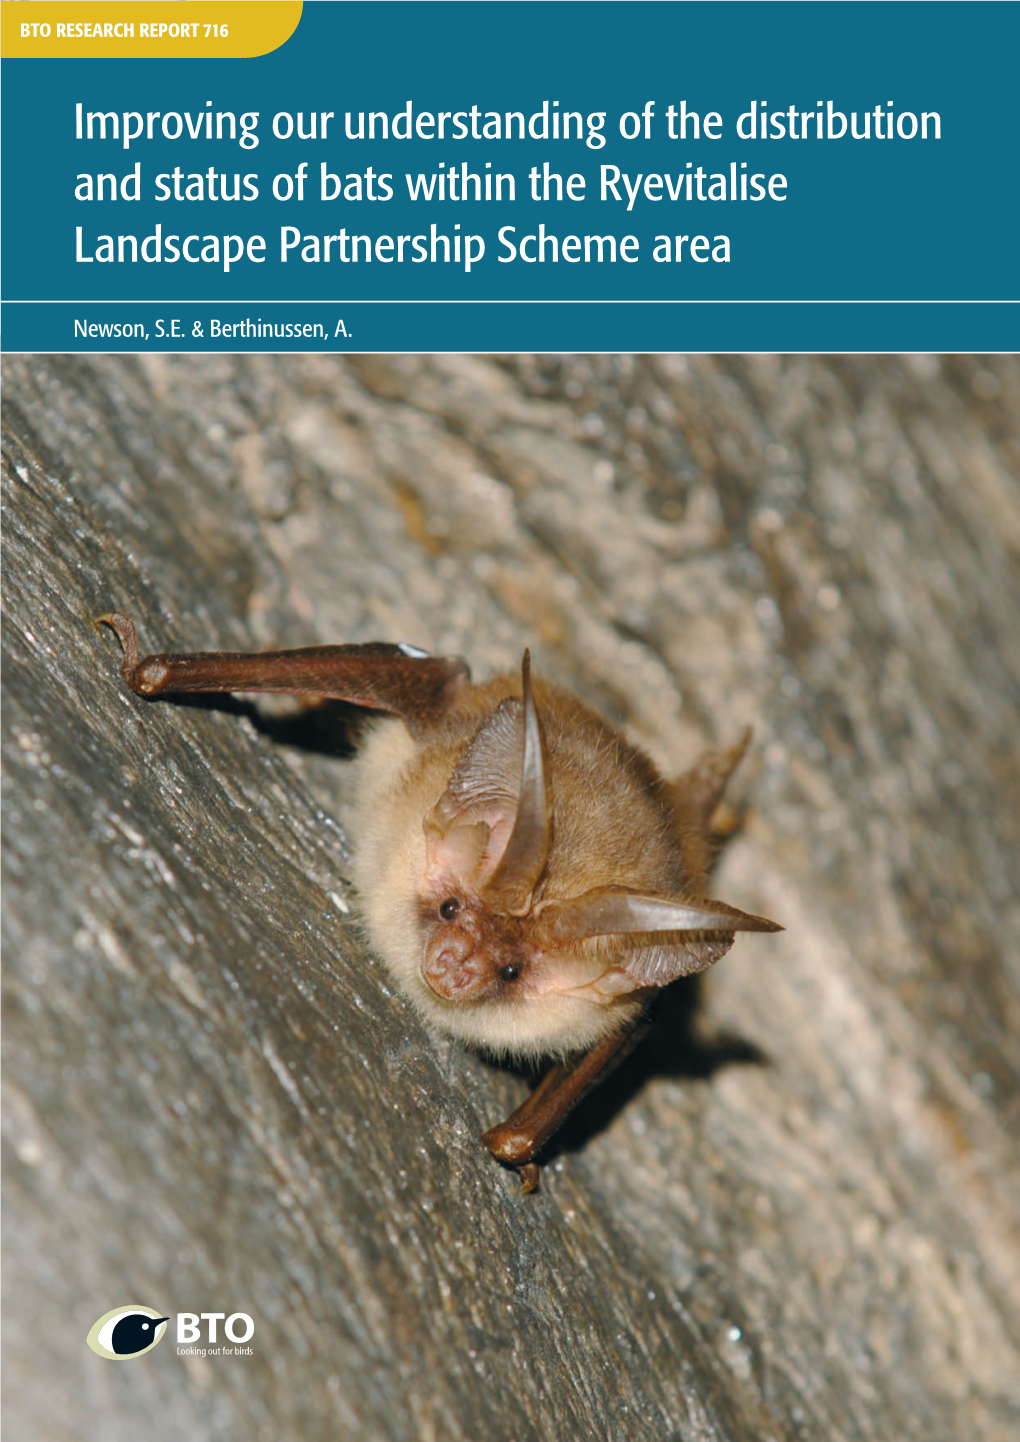 Improving Our Understanding of the Distribution and Status of Bats Within the Ryevitalise Landscape Partnership Scheme Area